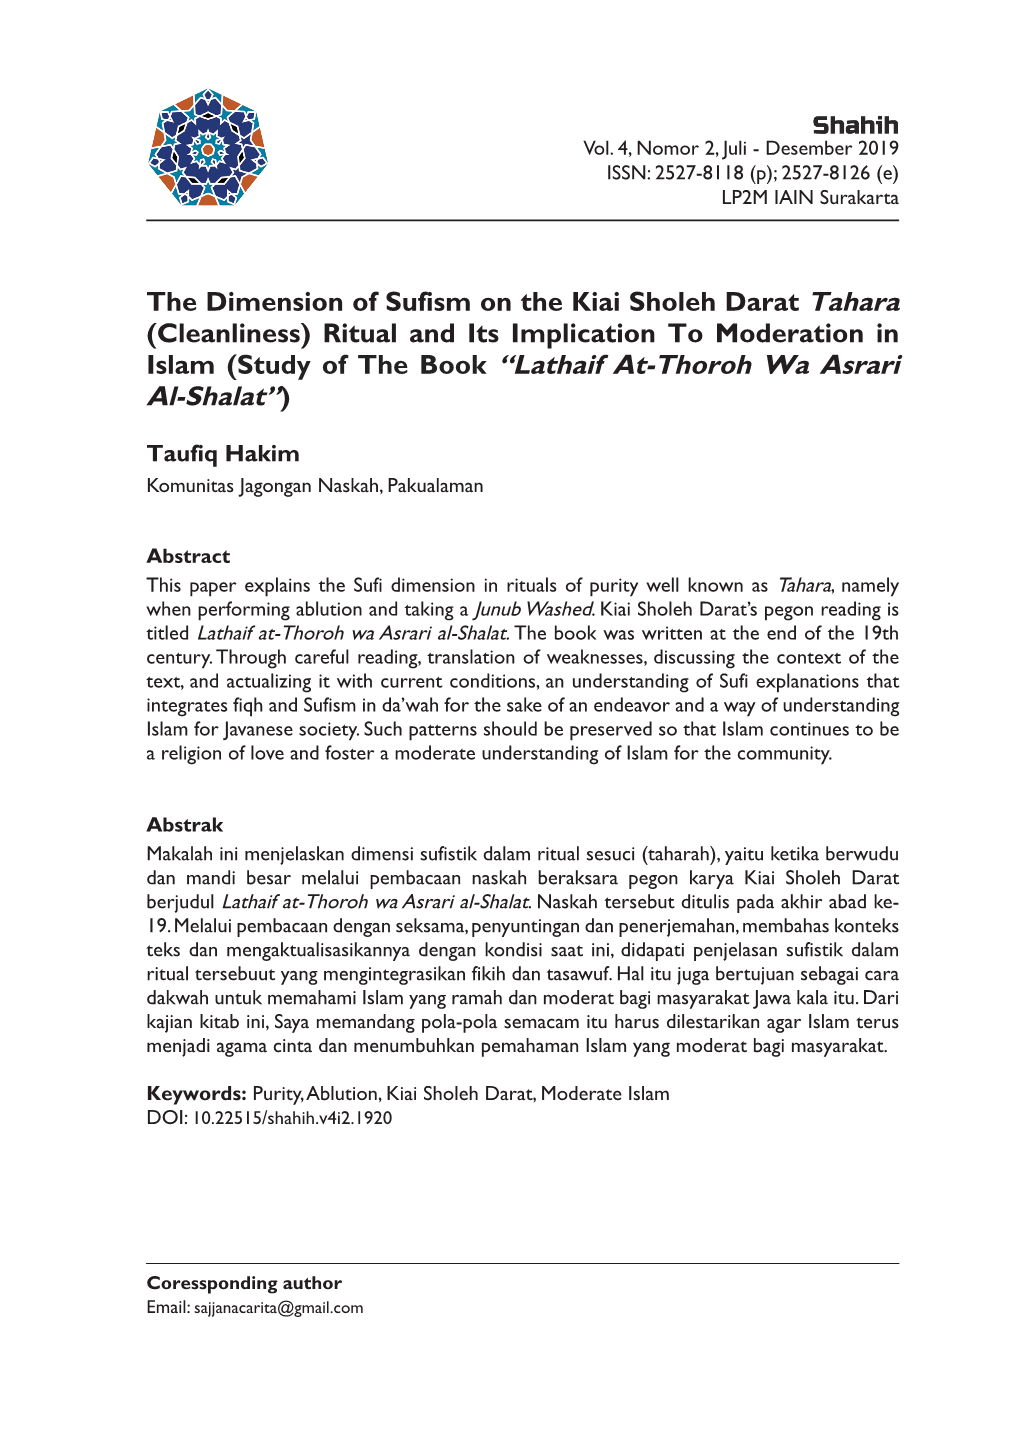 The Dimension of Sufism on the Kiai Sholeh Darat Tahara (Cleanliness) Ritual and Its Implication to Moderation in Islam (Study O